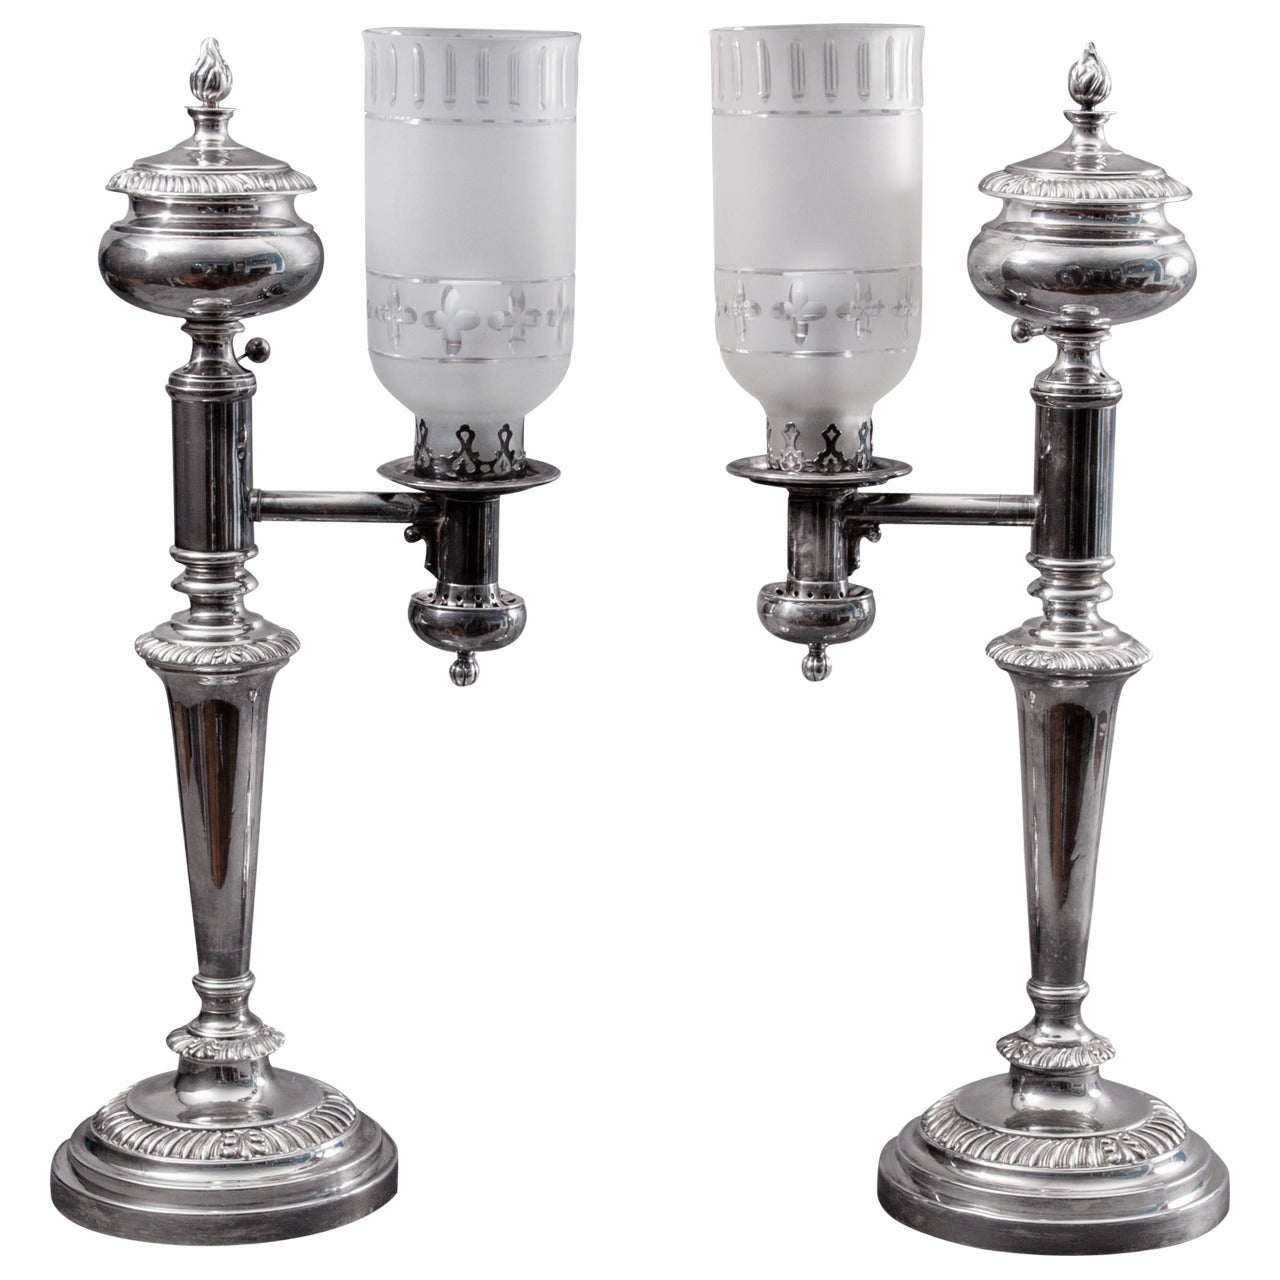 Pair of Sheffield Plate Argand Lamps, circa 1811